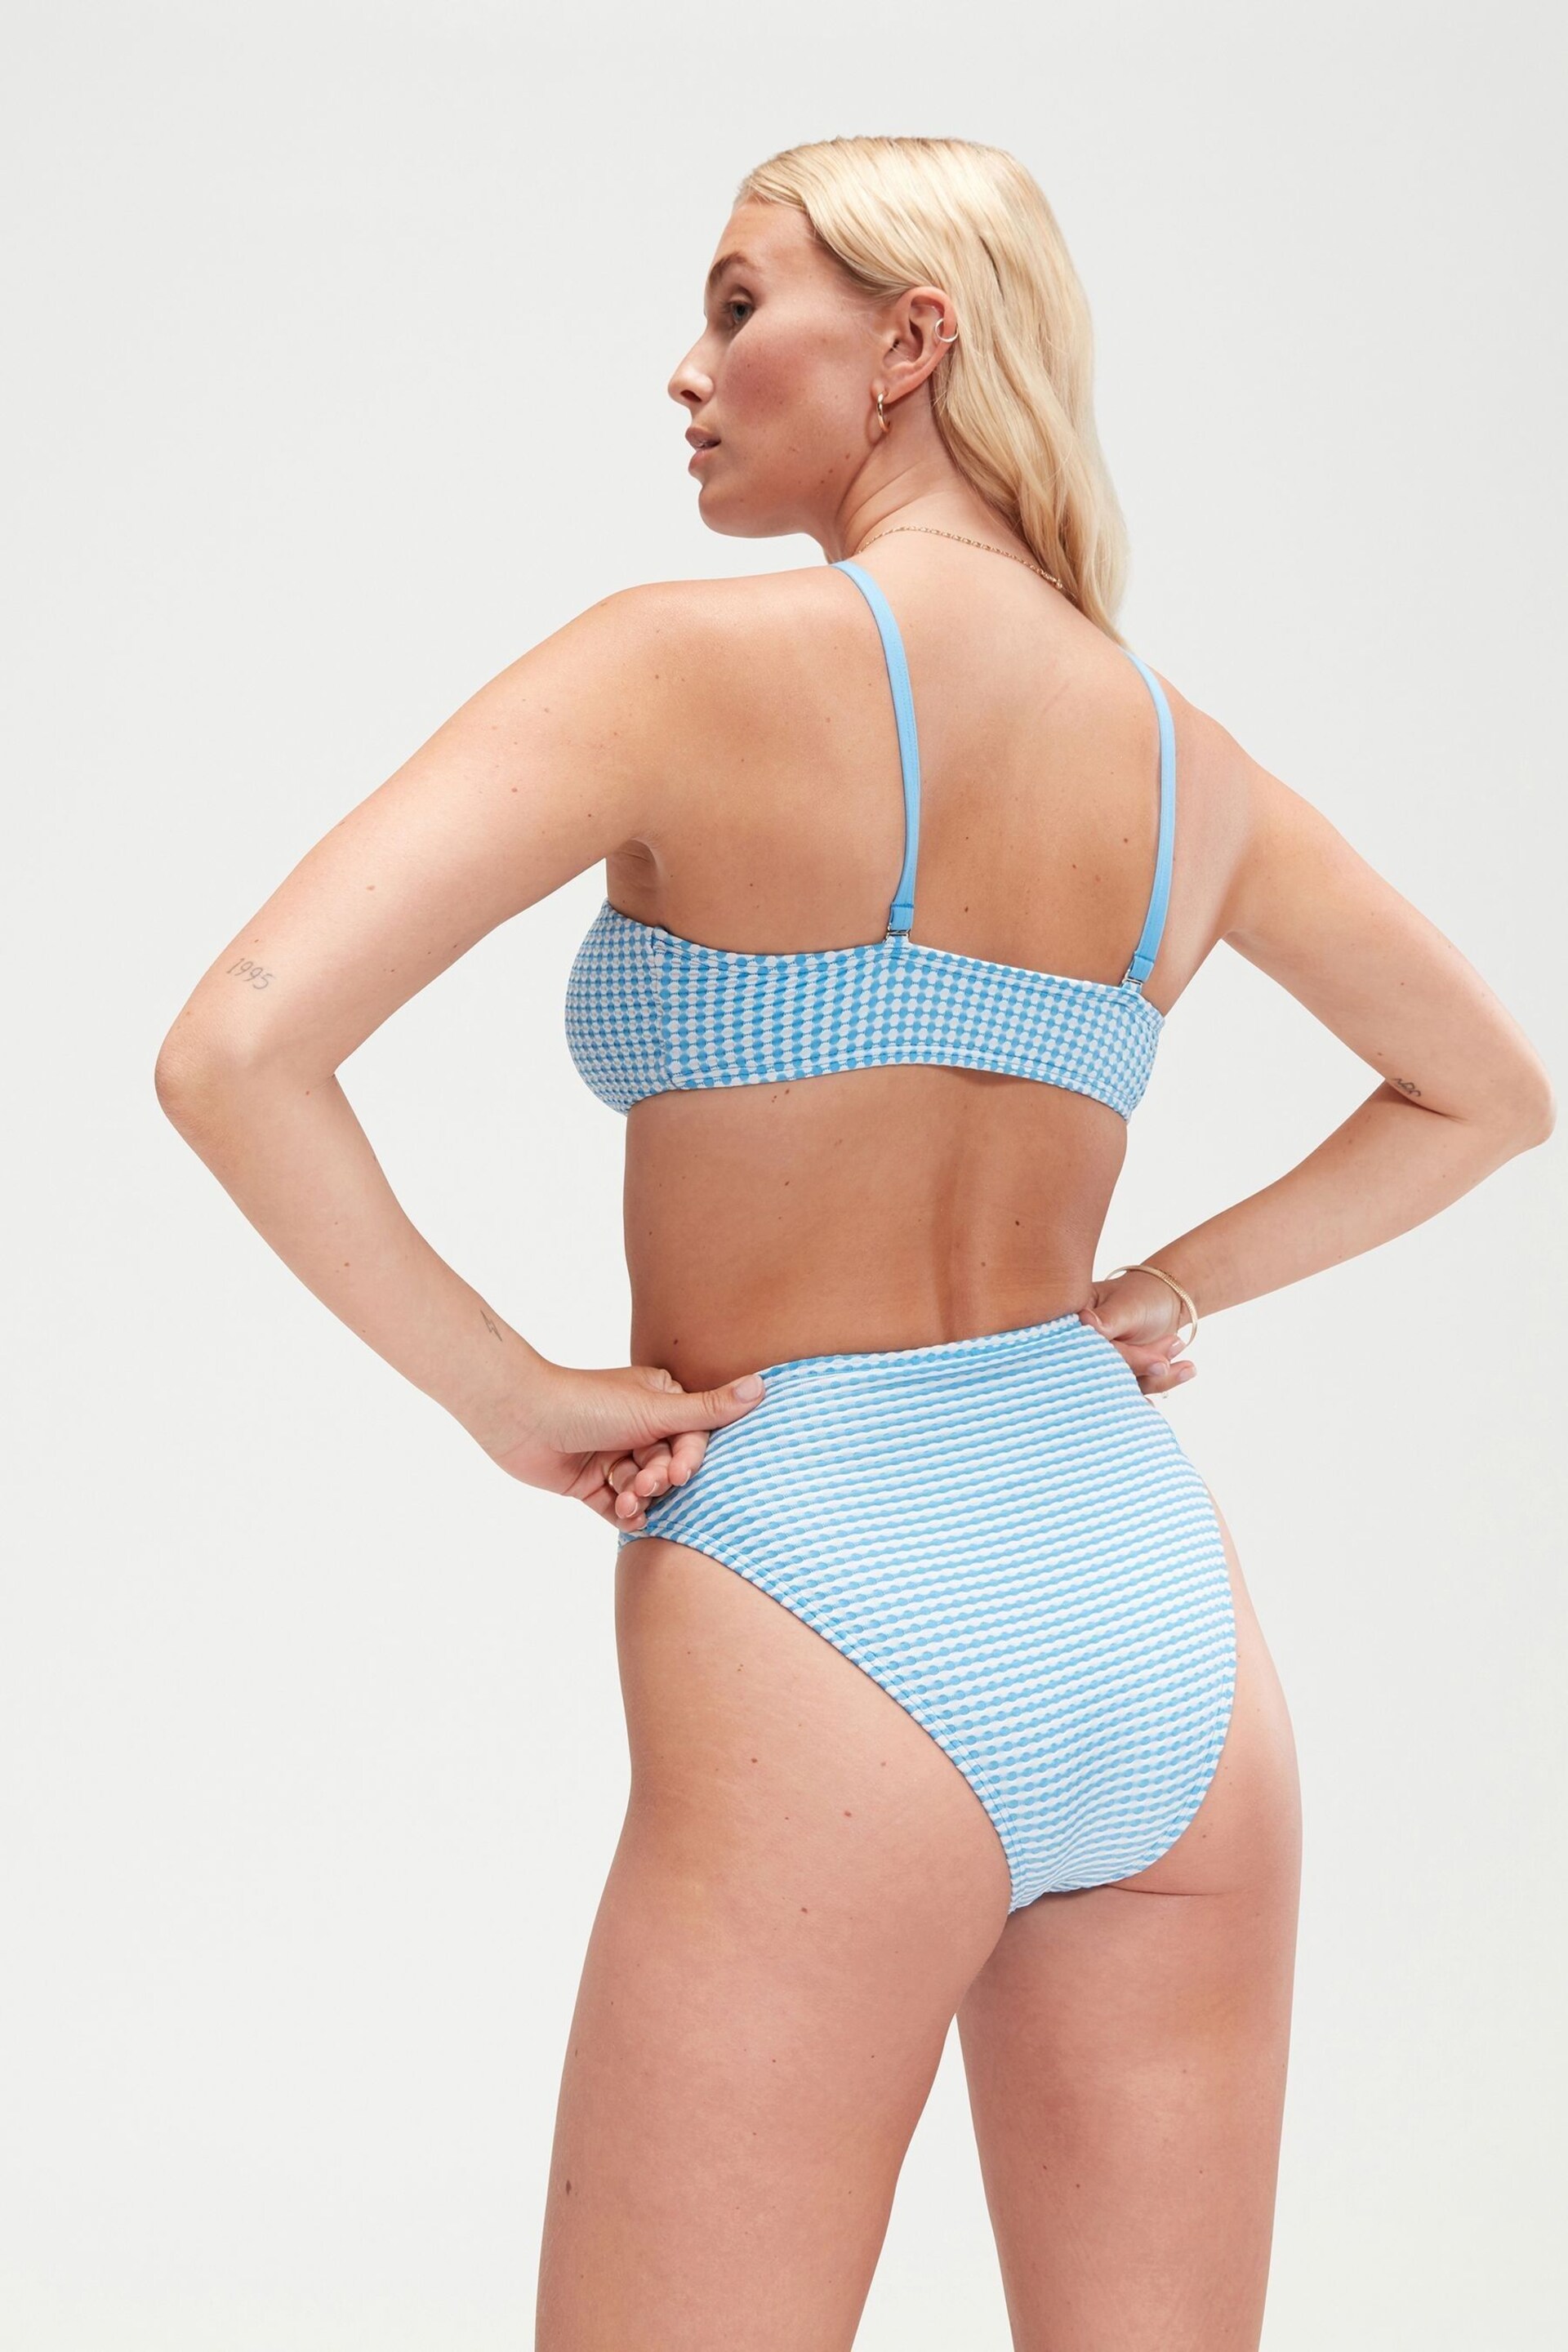 Speedo Gingham Convertible Cut-Out One Piece Swimsuit with UPF 50+ UV Protection - Image 2 of 5